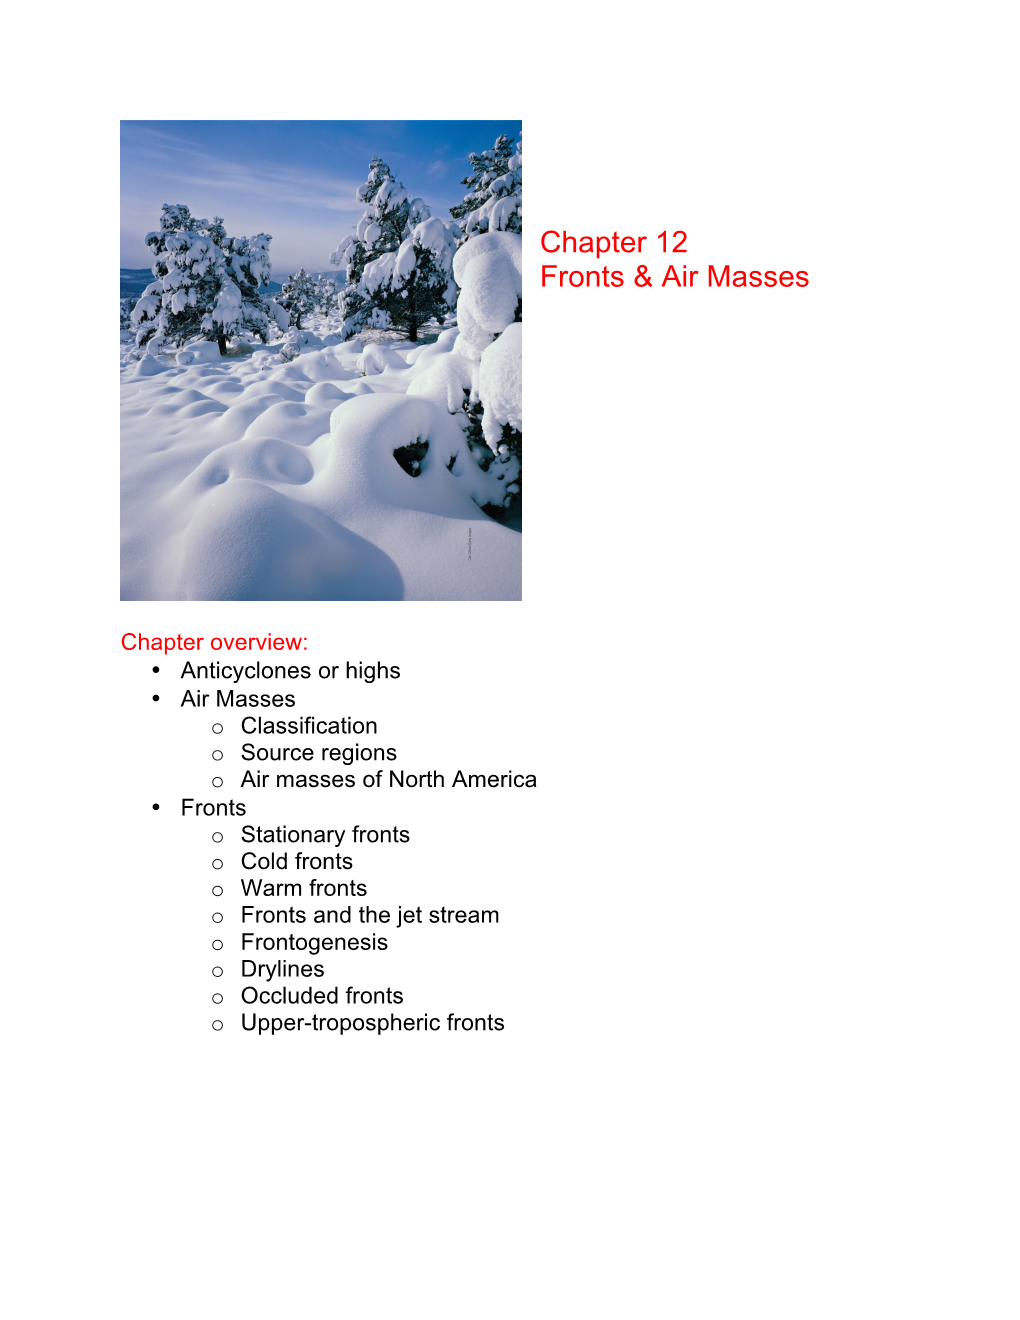 Chapter 12 Fronts & Air Masses